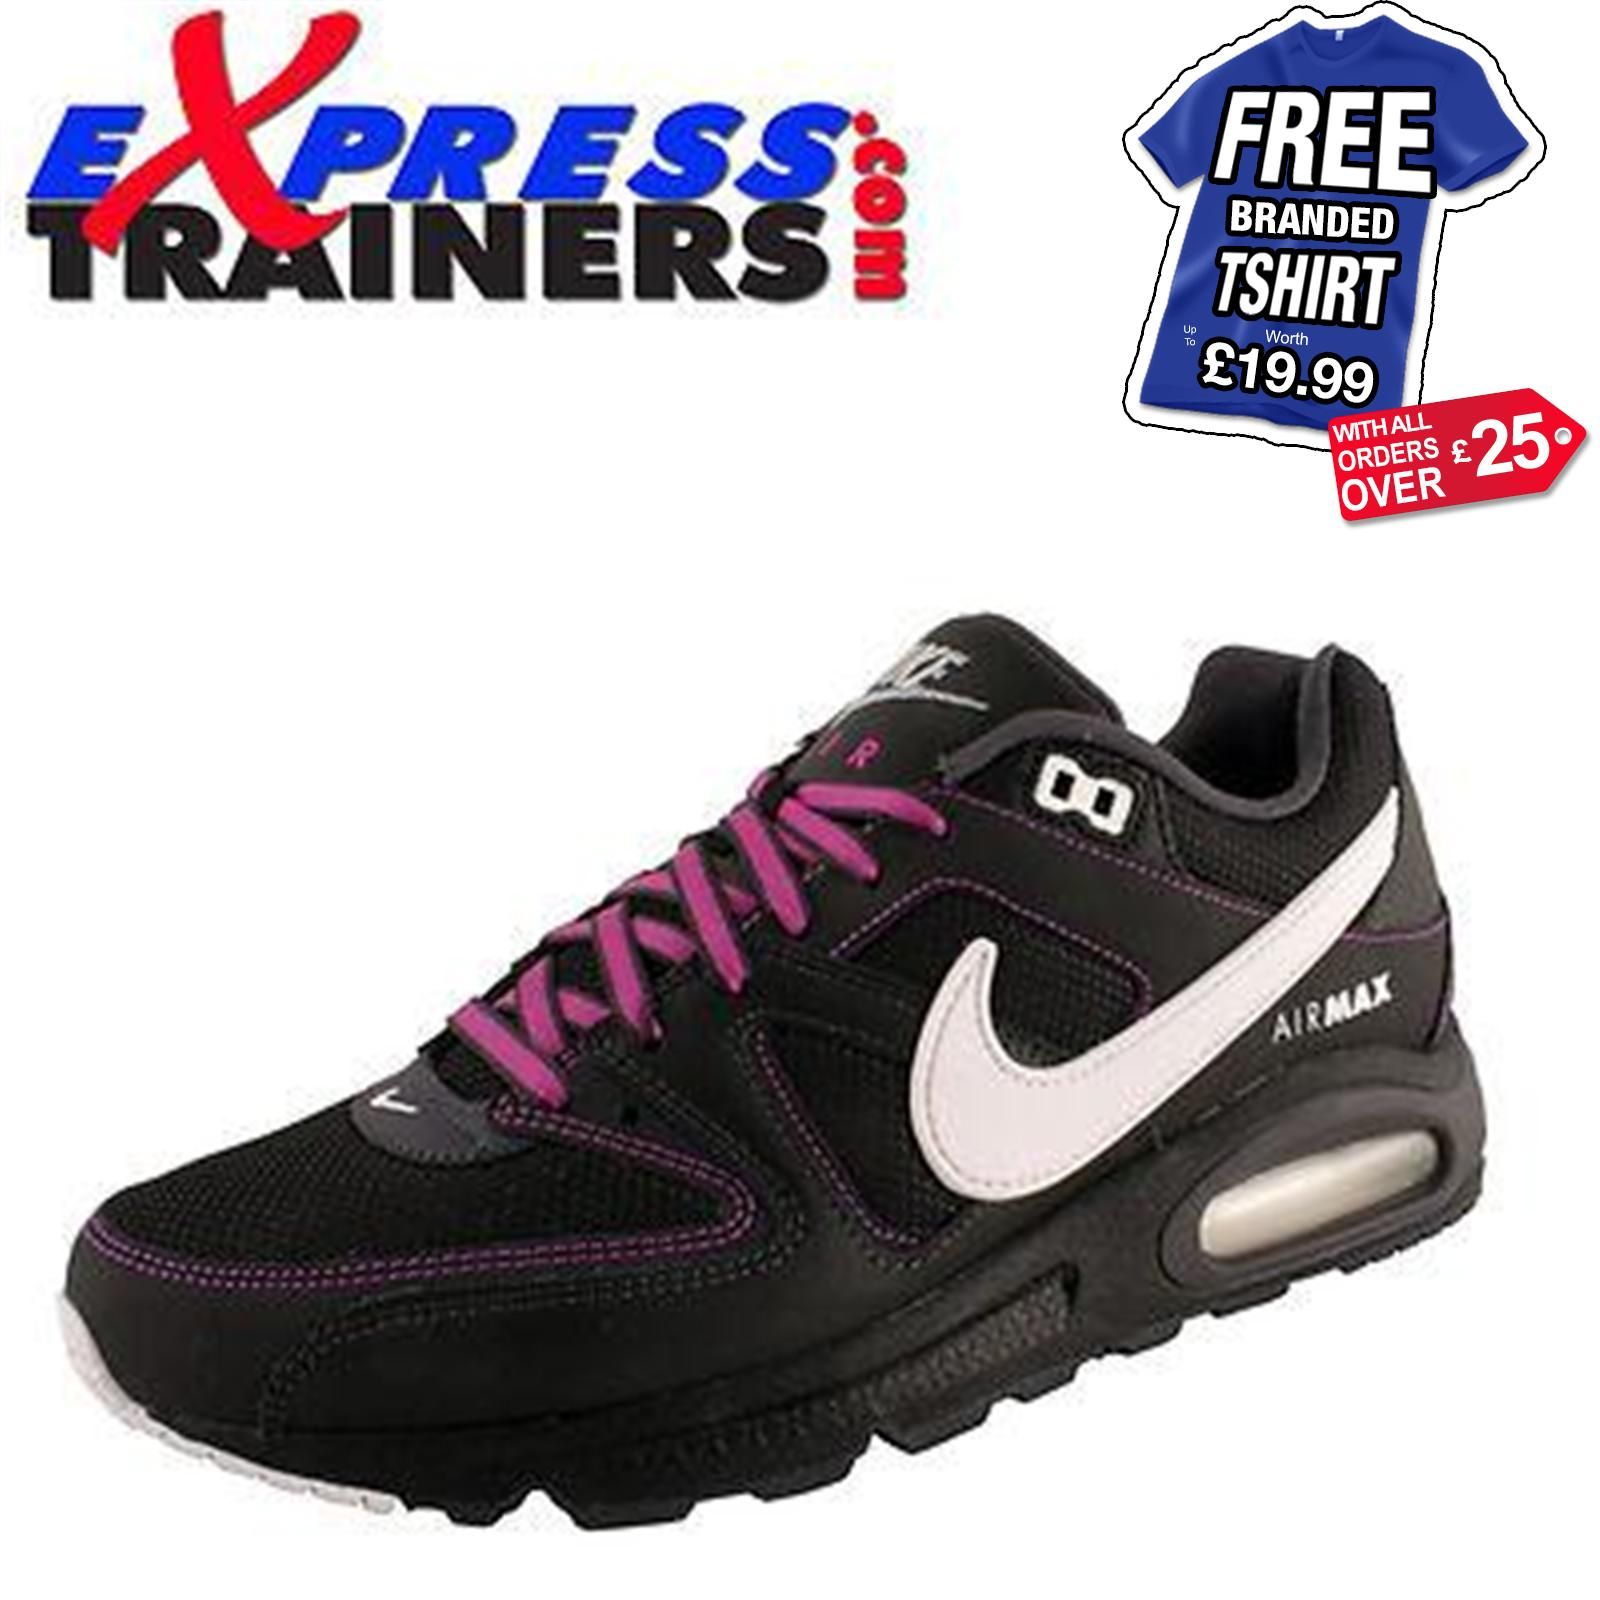 Nike Mens Air Max Command Leather & Textile Trainer/Running Shoe